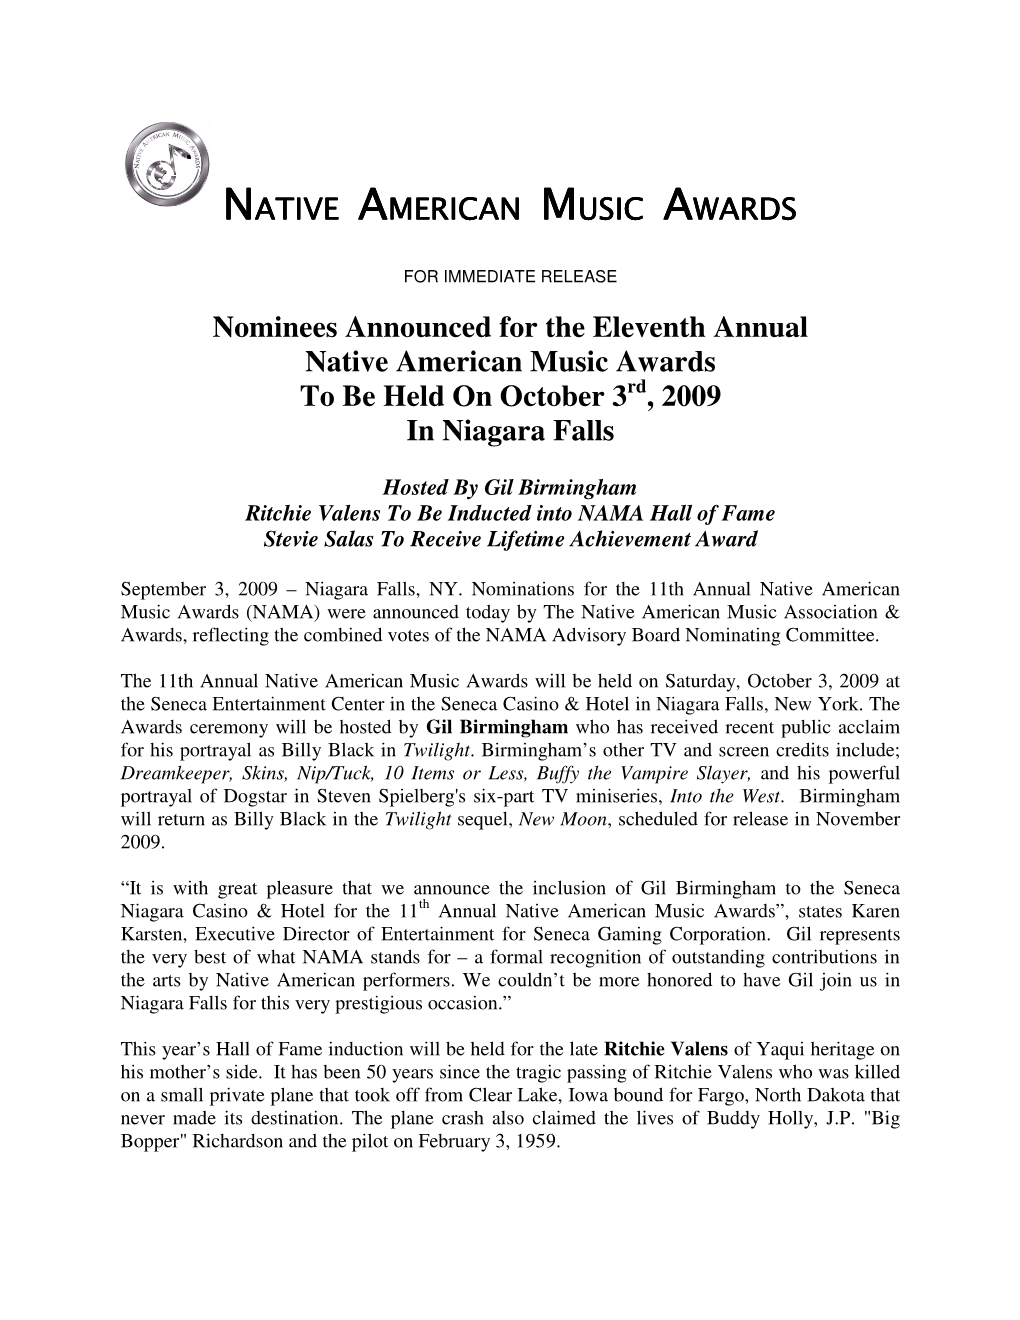 NATIVE AMERICAN MUSIC AWARDS Nominees Announced for The